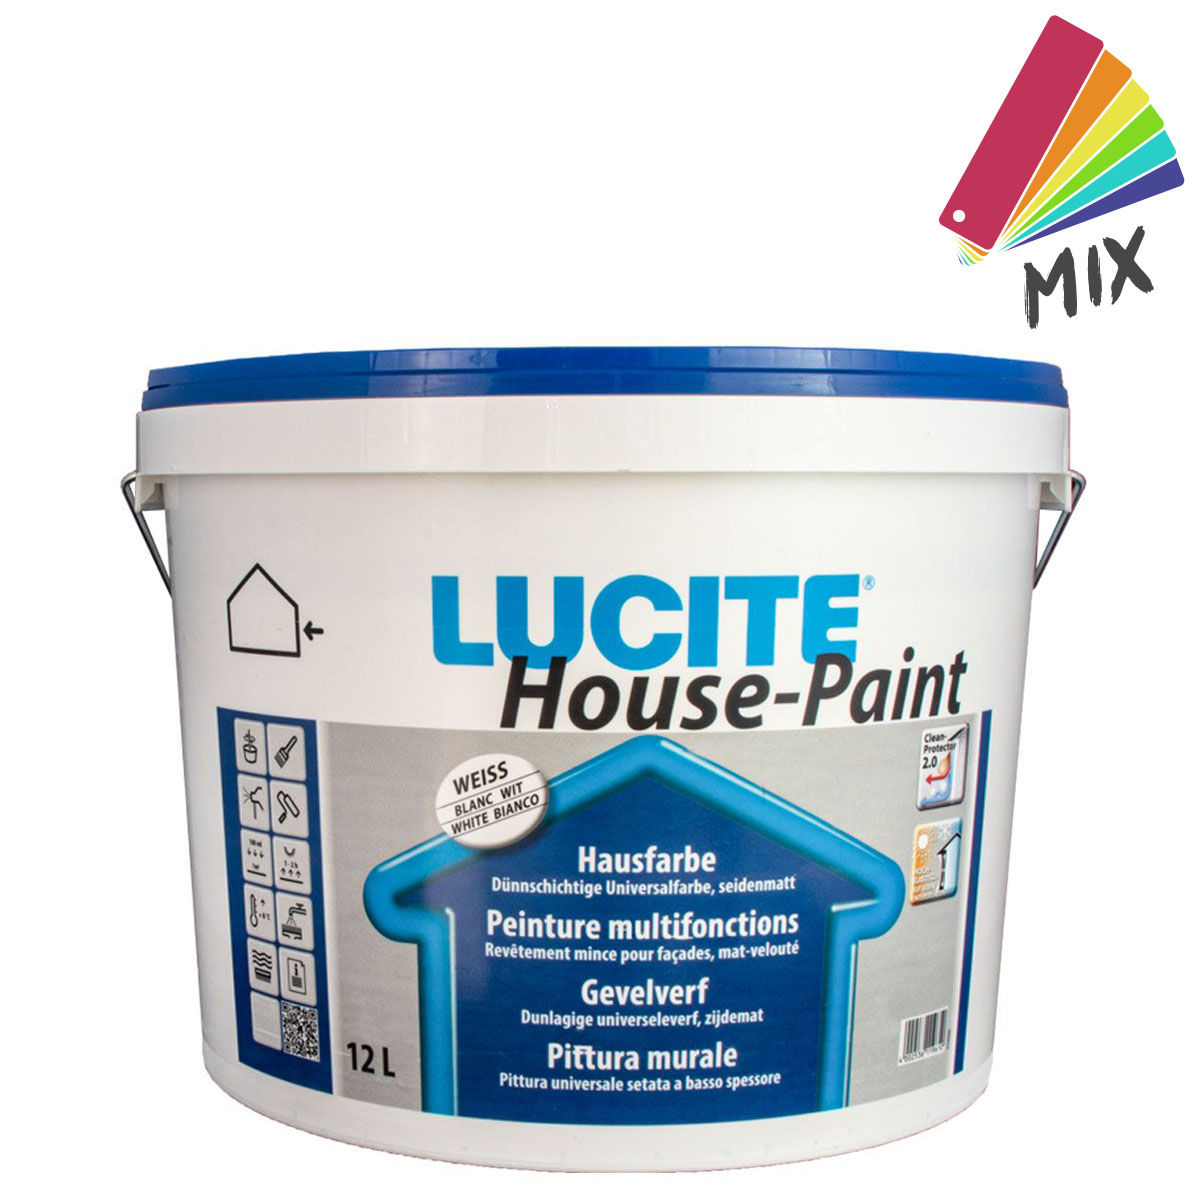 Lucite House Paint 12L MIX PG1 , Hausfarbe, Fassadenfarbe